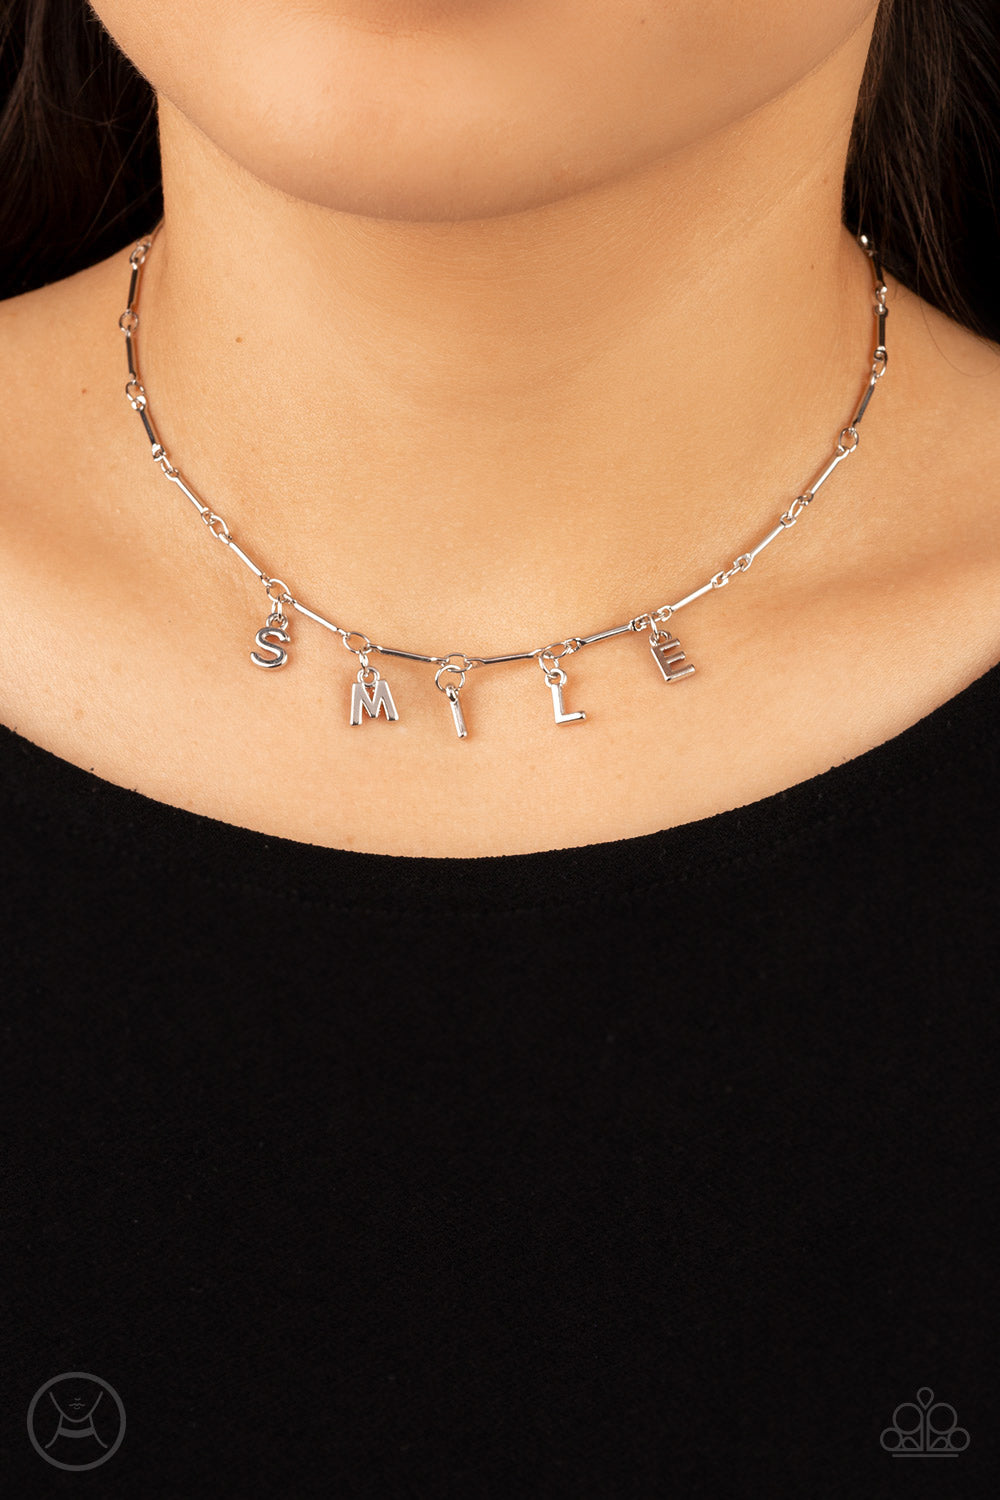 Say My Name Silver Choker Necklace - Paparazzi Accessories  Separated by dainty silver rods, silver letters spell out the word SMILE in a soft, and simple manner. Features an adjustable clasp closure.  Sold as one individual choker necklace. Includes one pair of matching earrings.